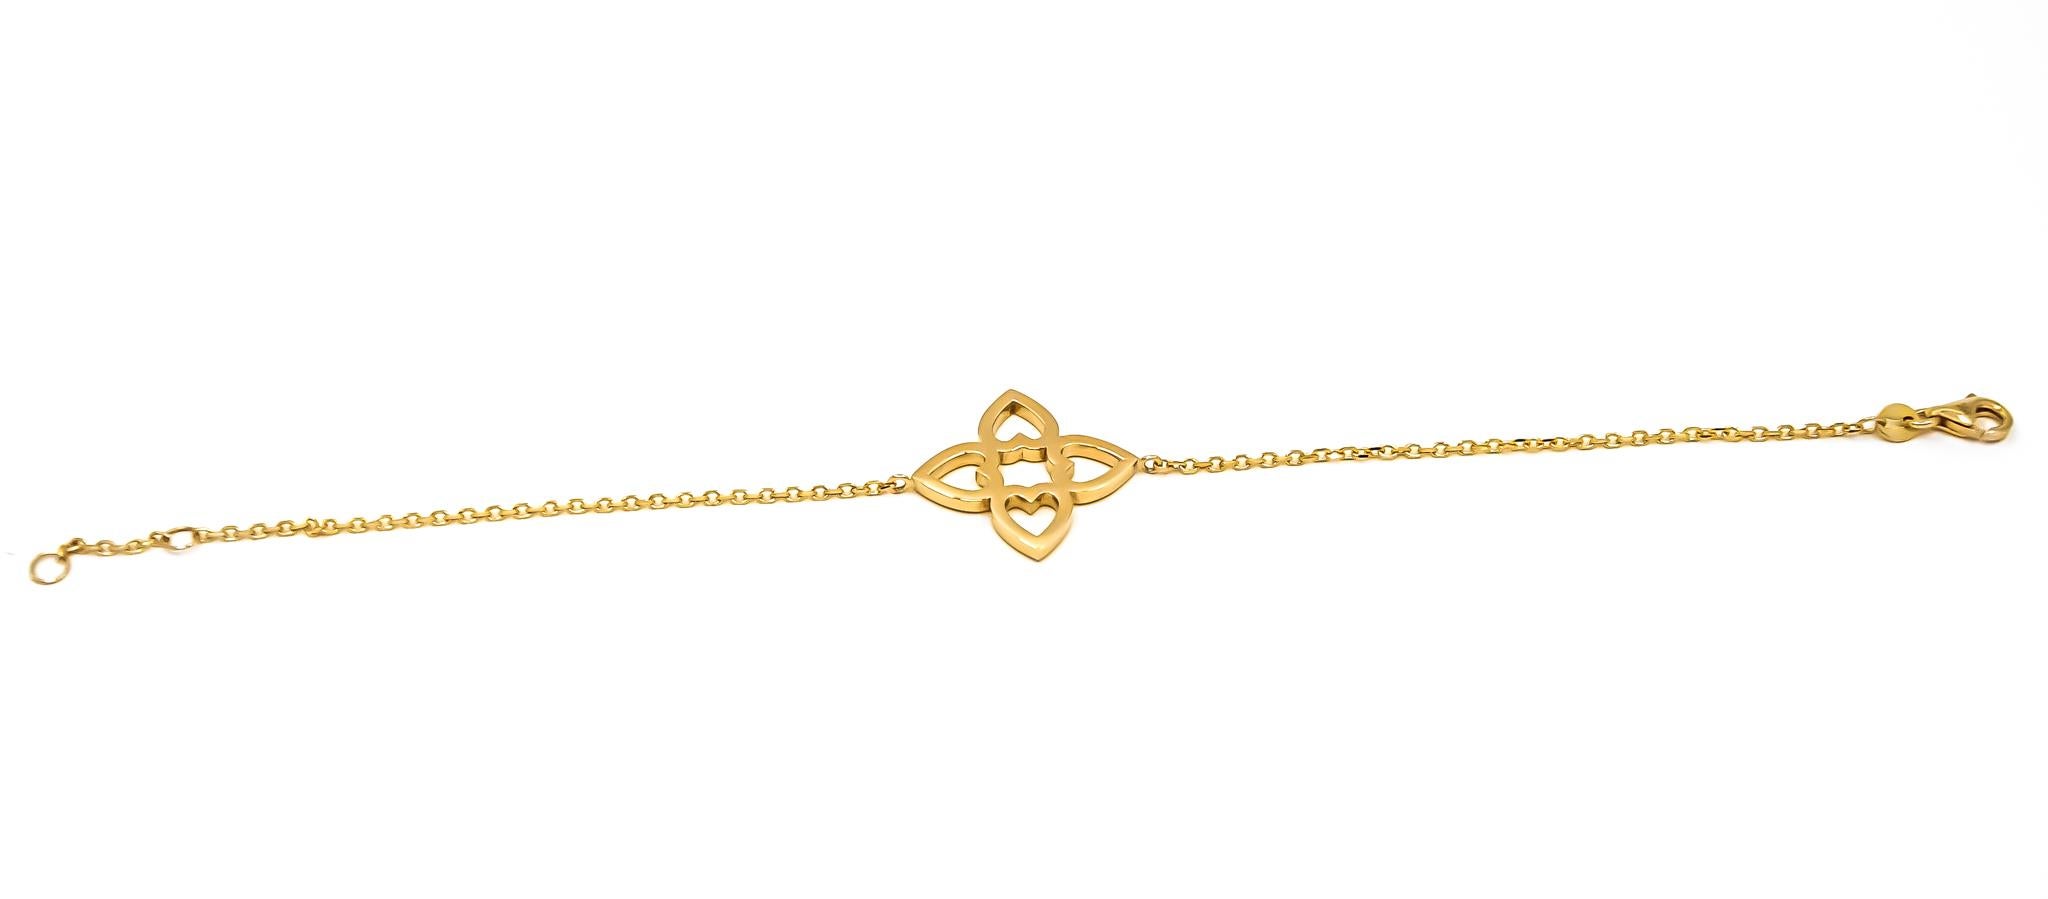 18kt solid yellow gold 1 motif bracelet by Mohamad Kamra from the Connected Hearts Collection.

Bracelet size 18.5cm adjustable to 17.5cm.

Bracelet can be made in any wrist size.